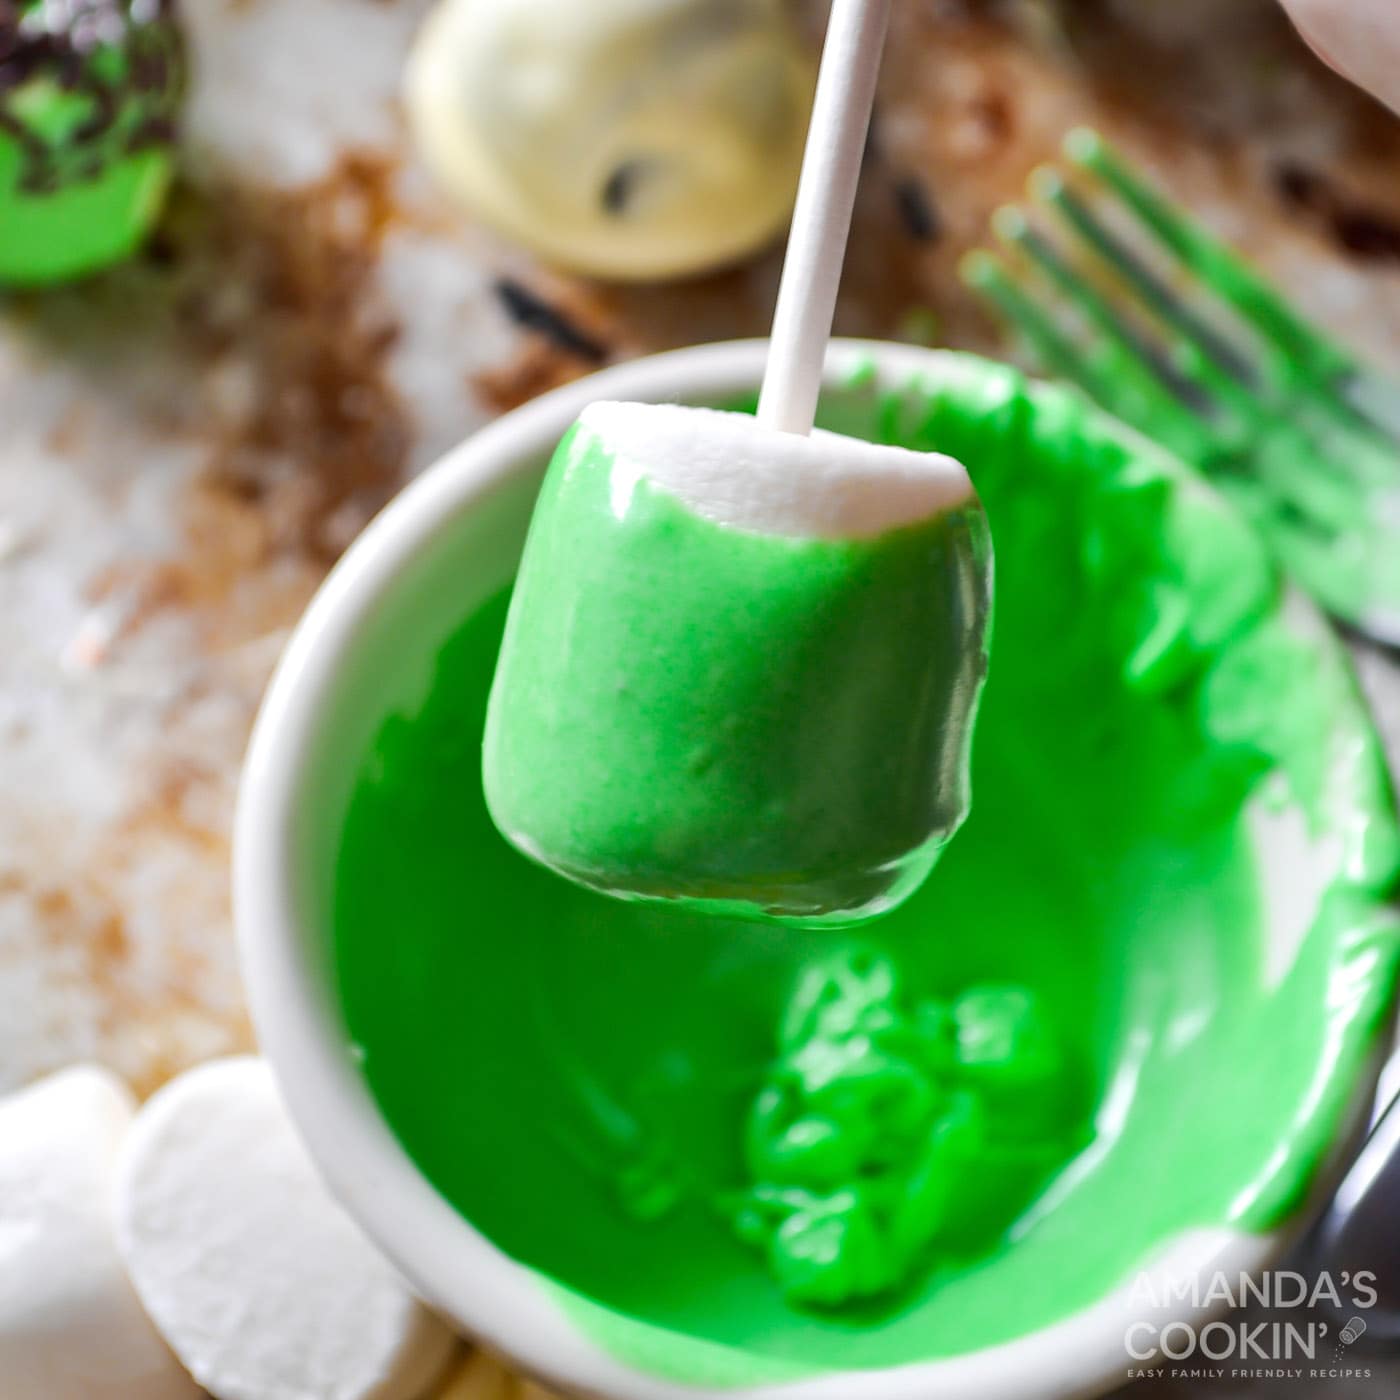 dipping marshmallow into green chocolate